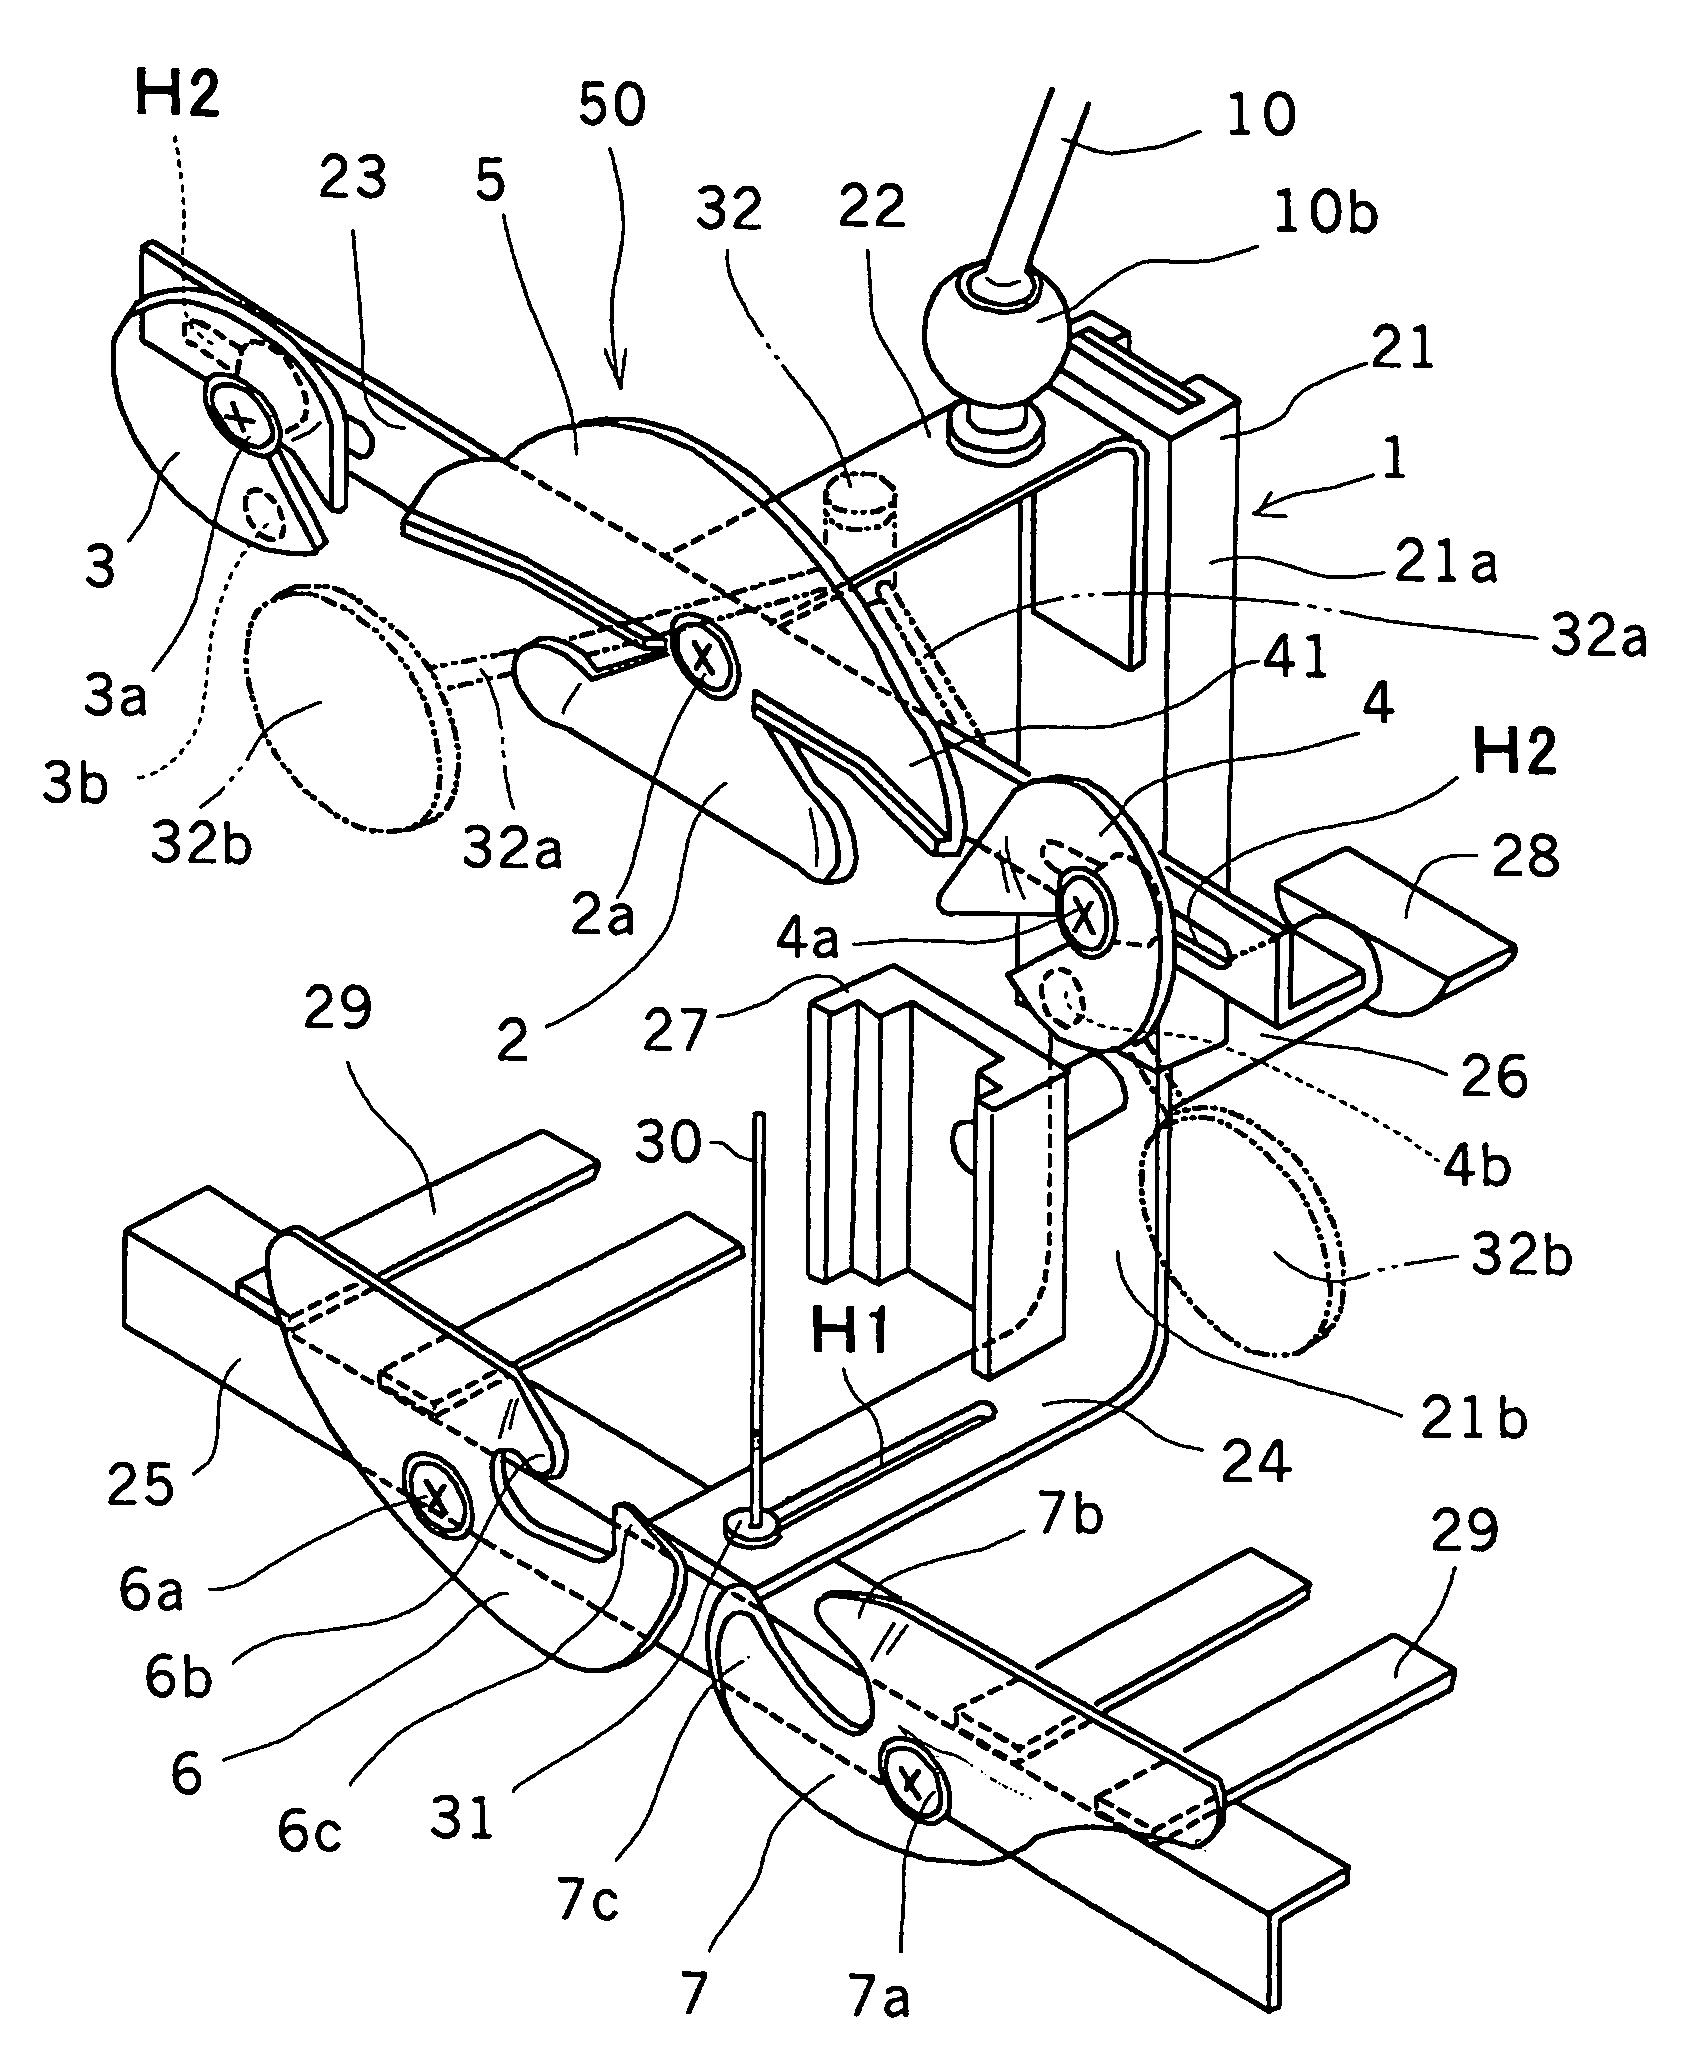 Apparatus having page turning capability for reading assistance